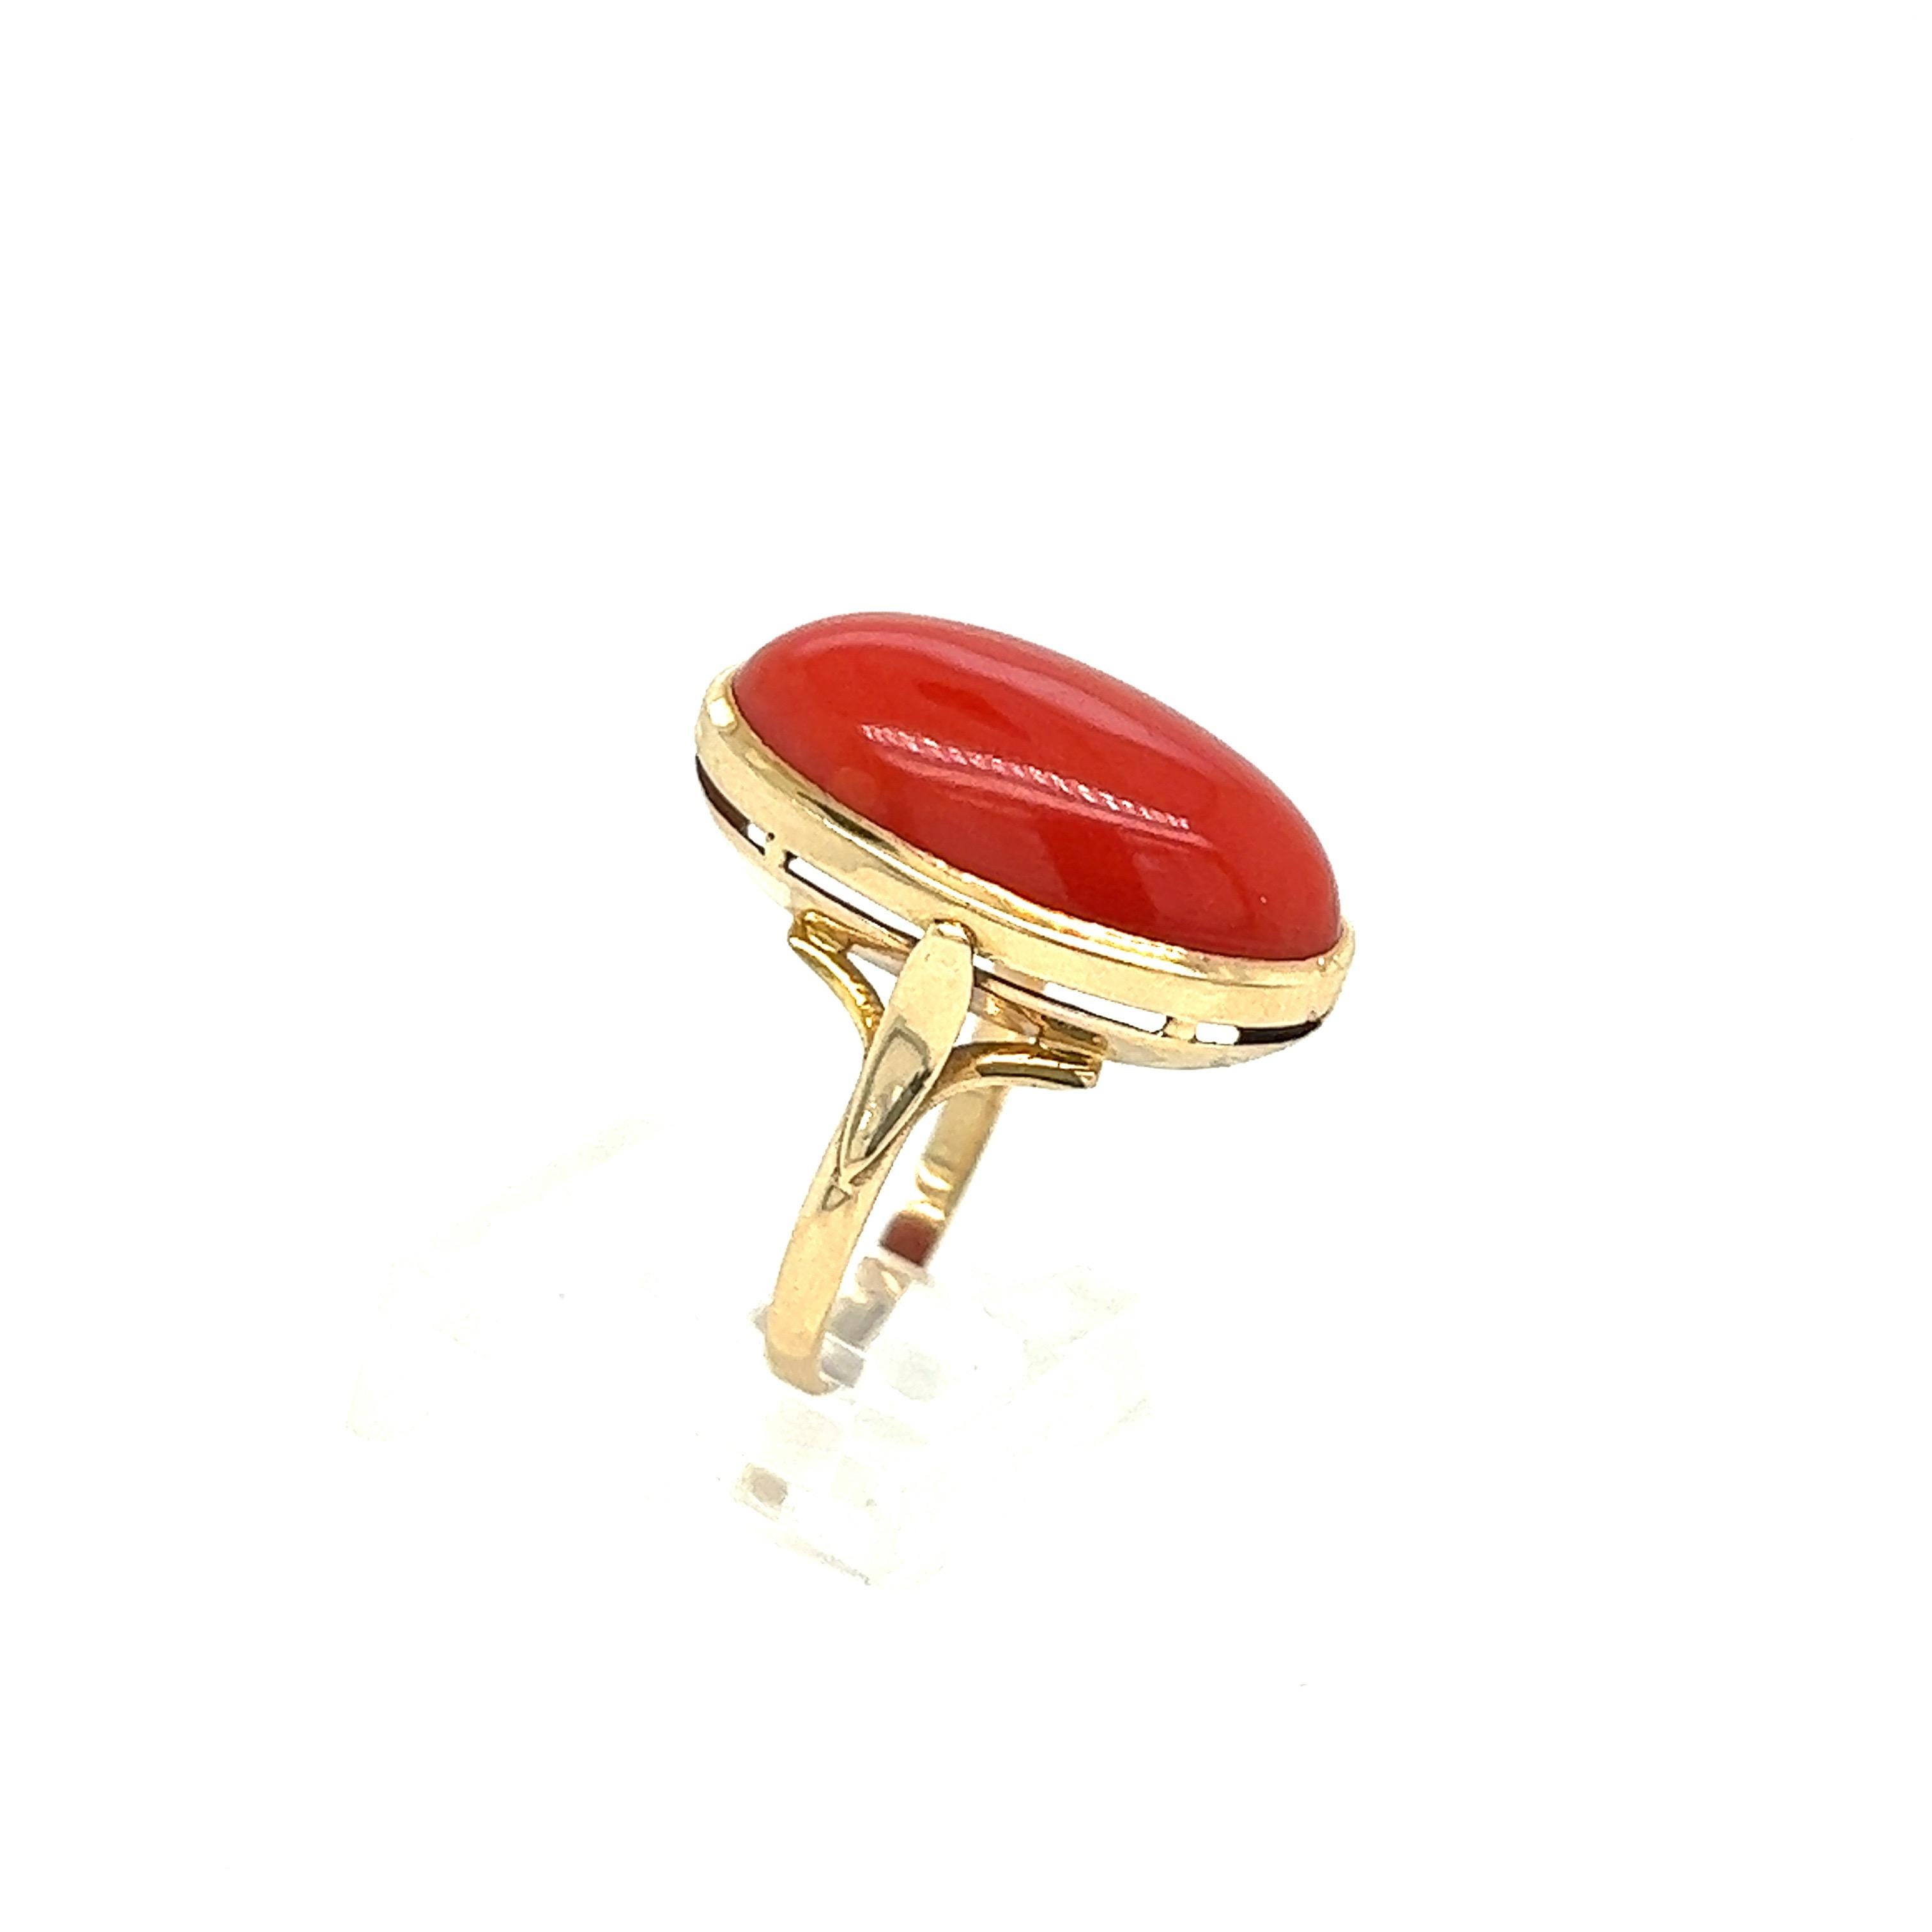 Oval coral gold ring

Cabochon coral (11 x 21 mm), 14 karat yellow gold

Size: 6.25 US
Total weight: 5.6 grams
